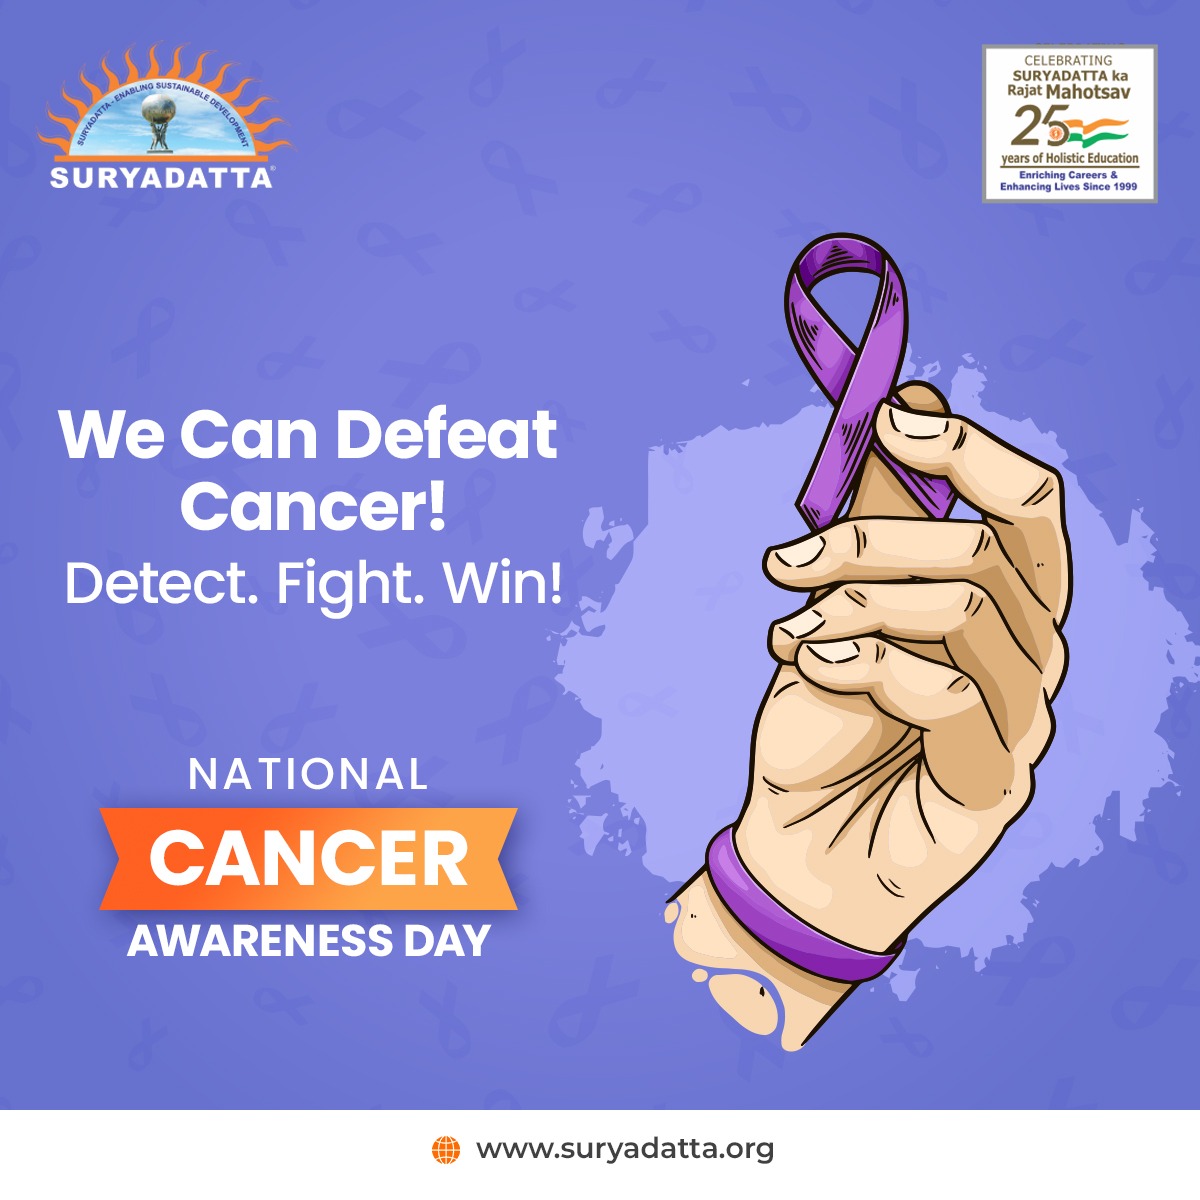 On National Cancer Awareness Day, we at Suryadatta Group of Institutes want to lay special emphasis on the need for regular health checkups so you can lead a happy, healthy life! National Cancer Awareness Day #SGI #NationalCancerAwarenessDay #CancerAwareness #CancerPrevention